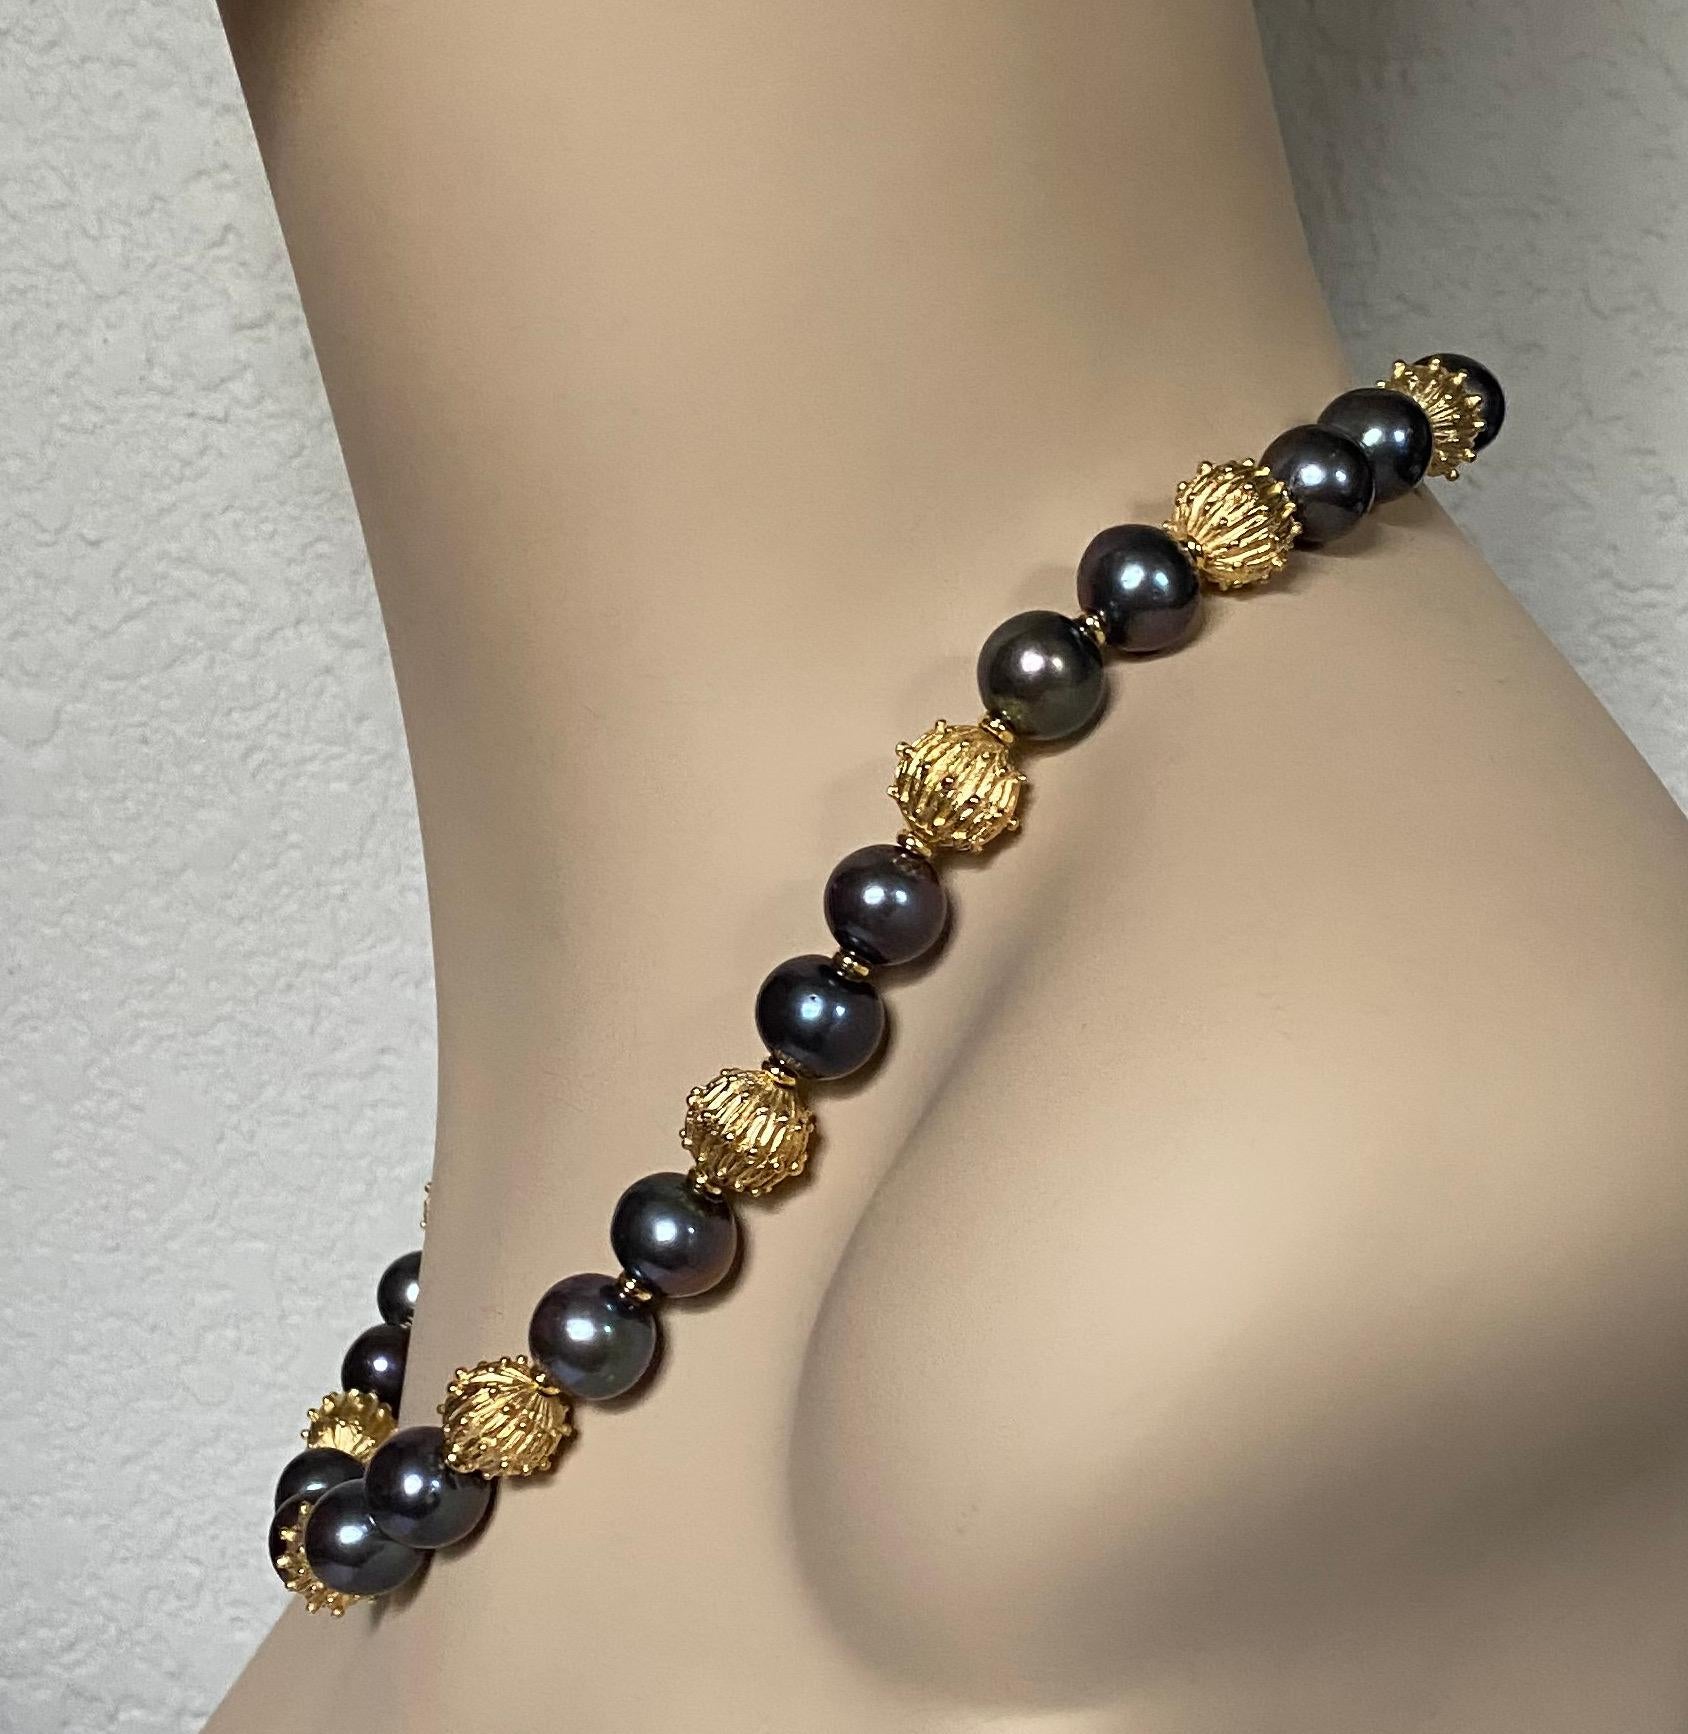 Baroque black pearls are paired with granulated beads in this bold beaded necklace.   The pearls (origin: China) are referred to as 